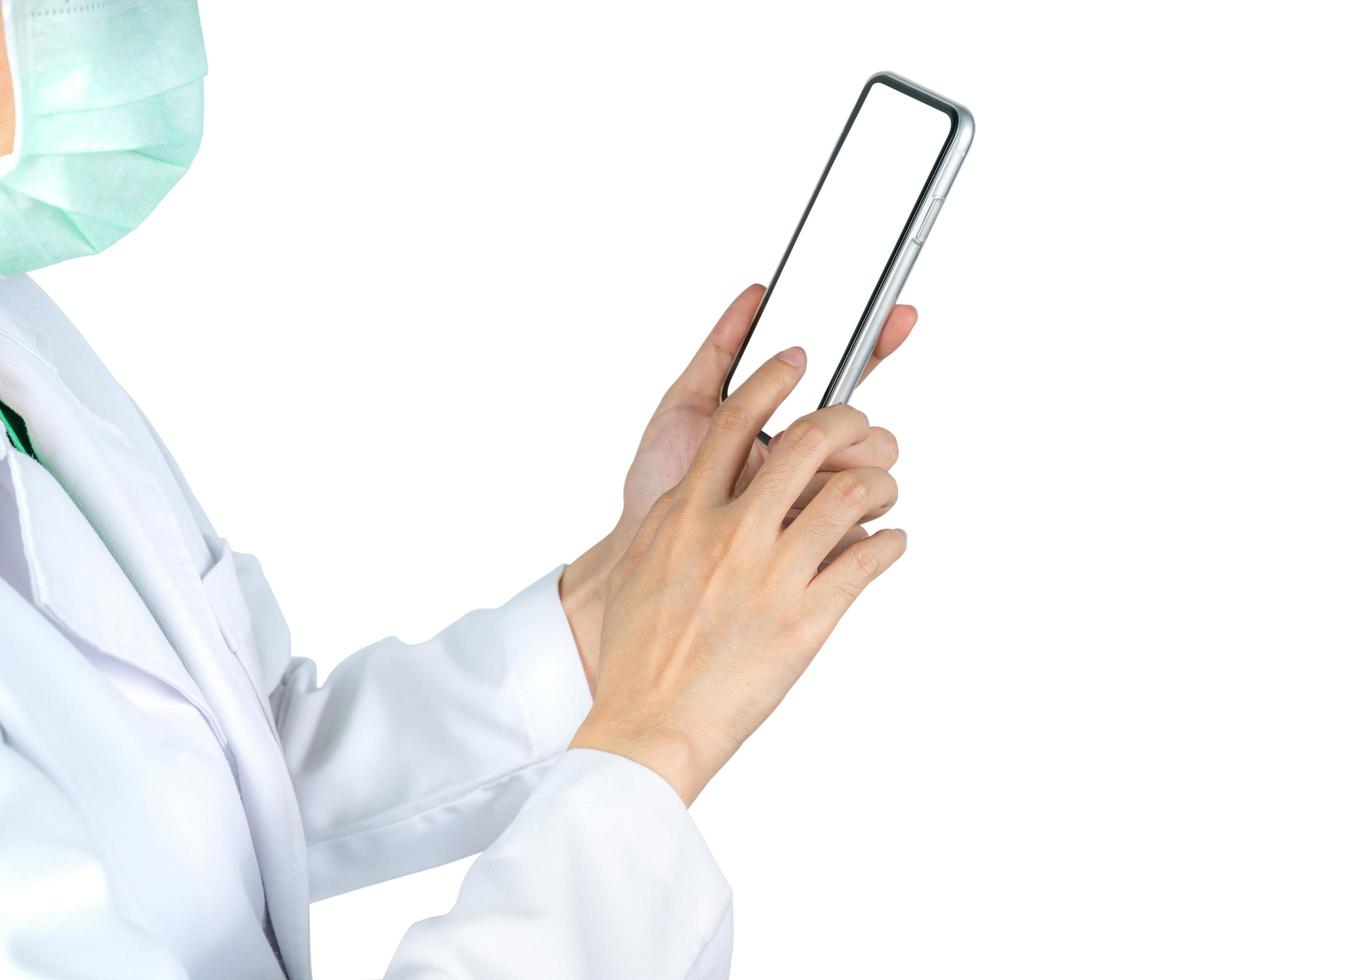 Asian doctor use mobile phone to communicate with nurse or healthcare providers to consult about patients information in hospital. Woman's hand holding and using smartphone. Physician with face mask. photo